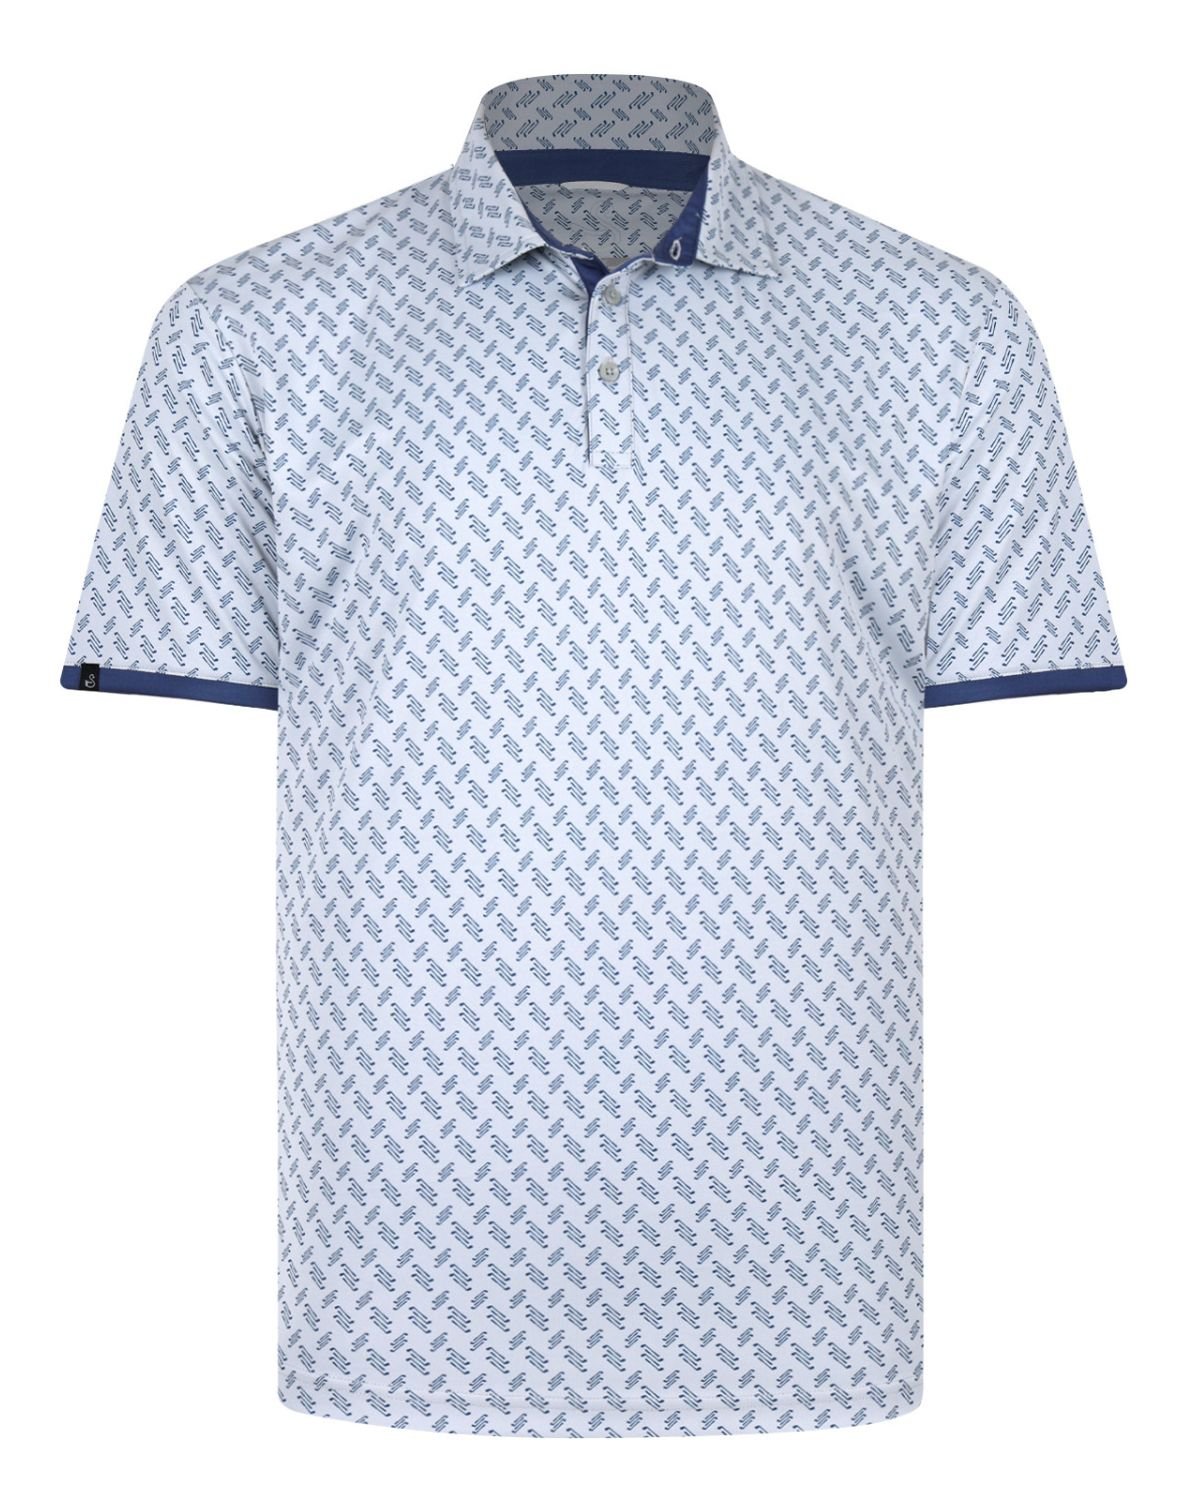 Swannies Golf - Men's Max Polo